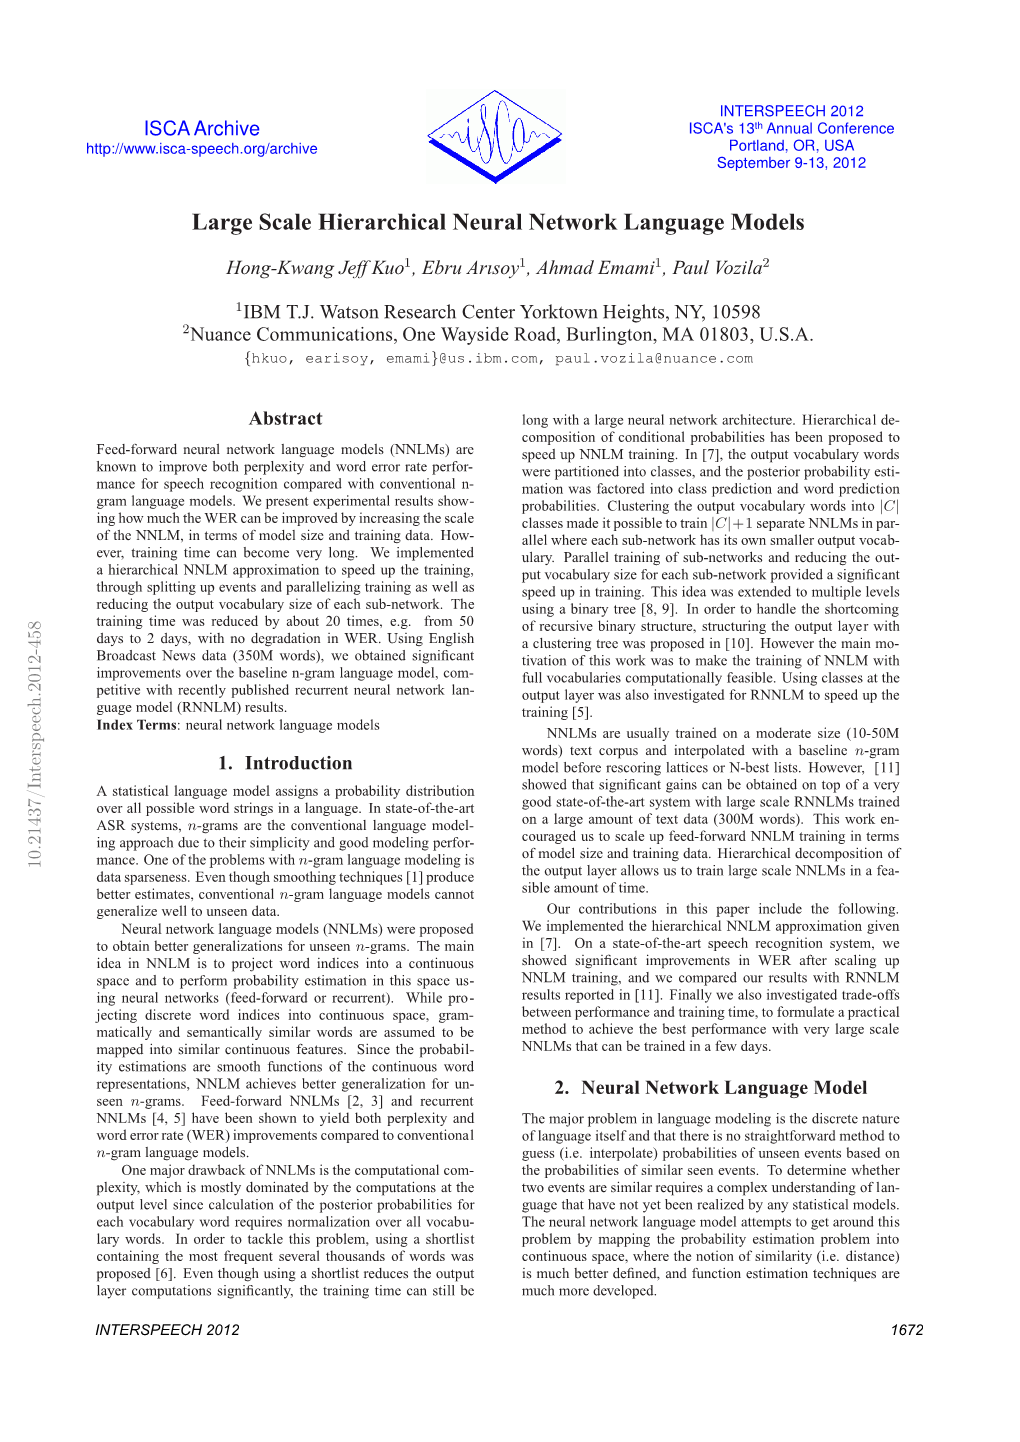 Large Scale Hierarchical Neural Network Language Models